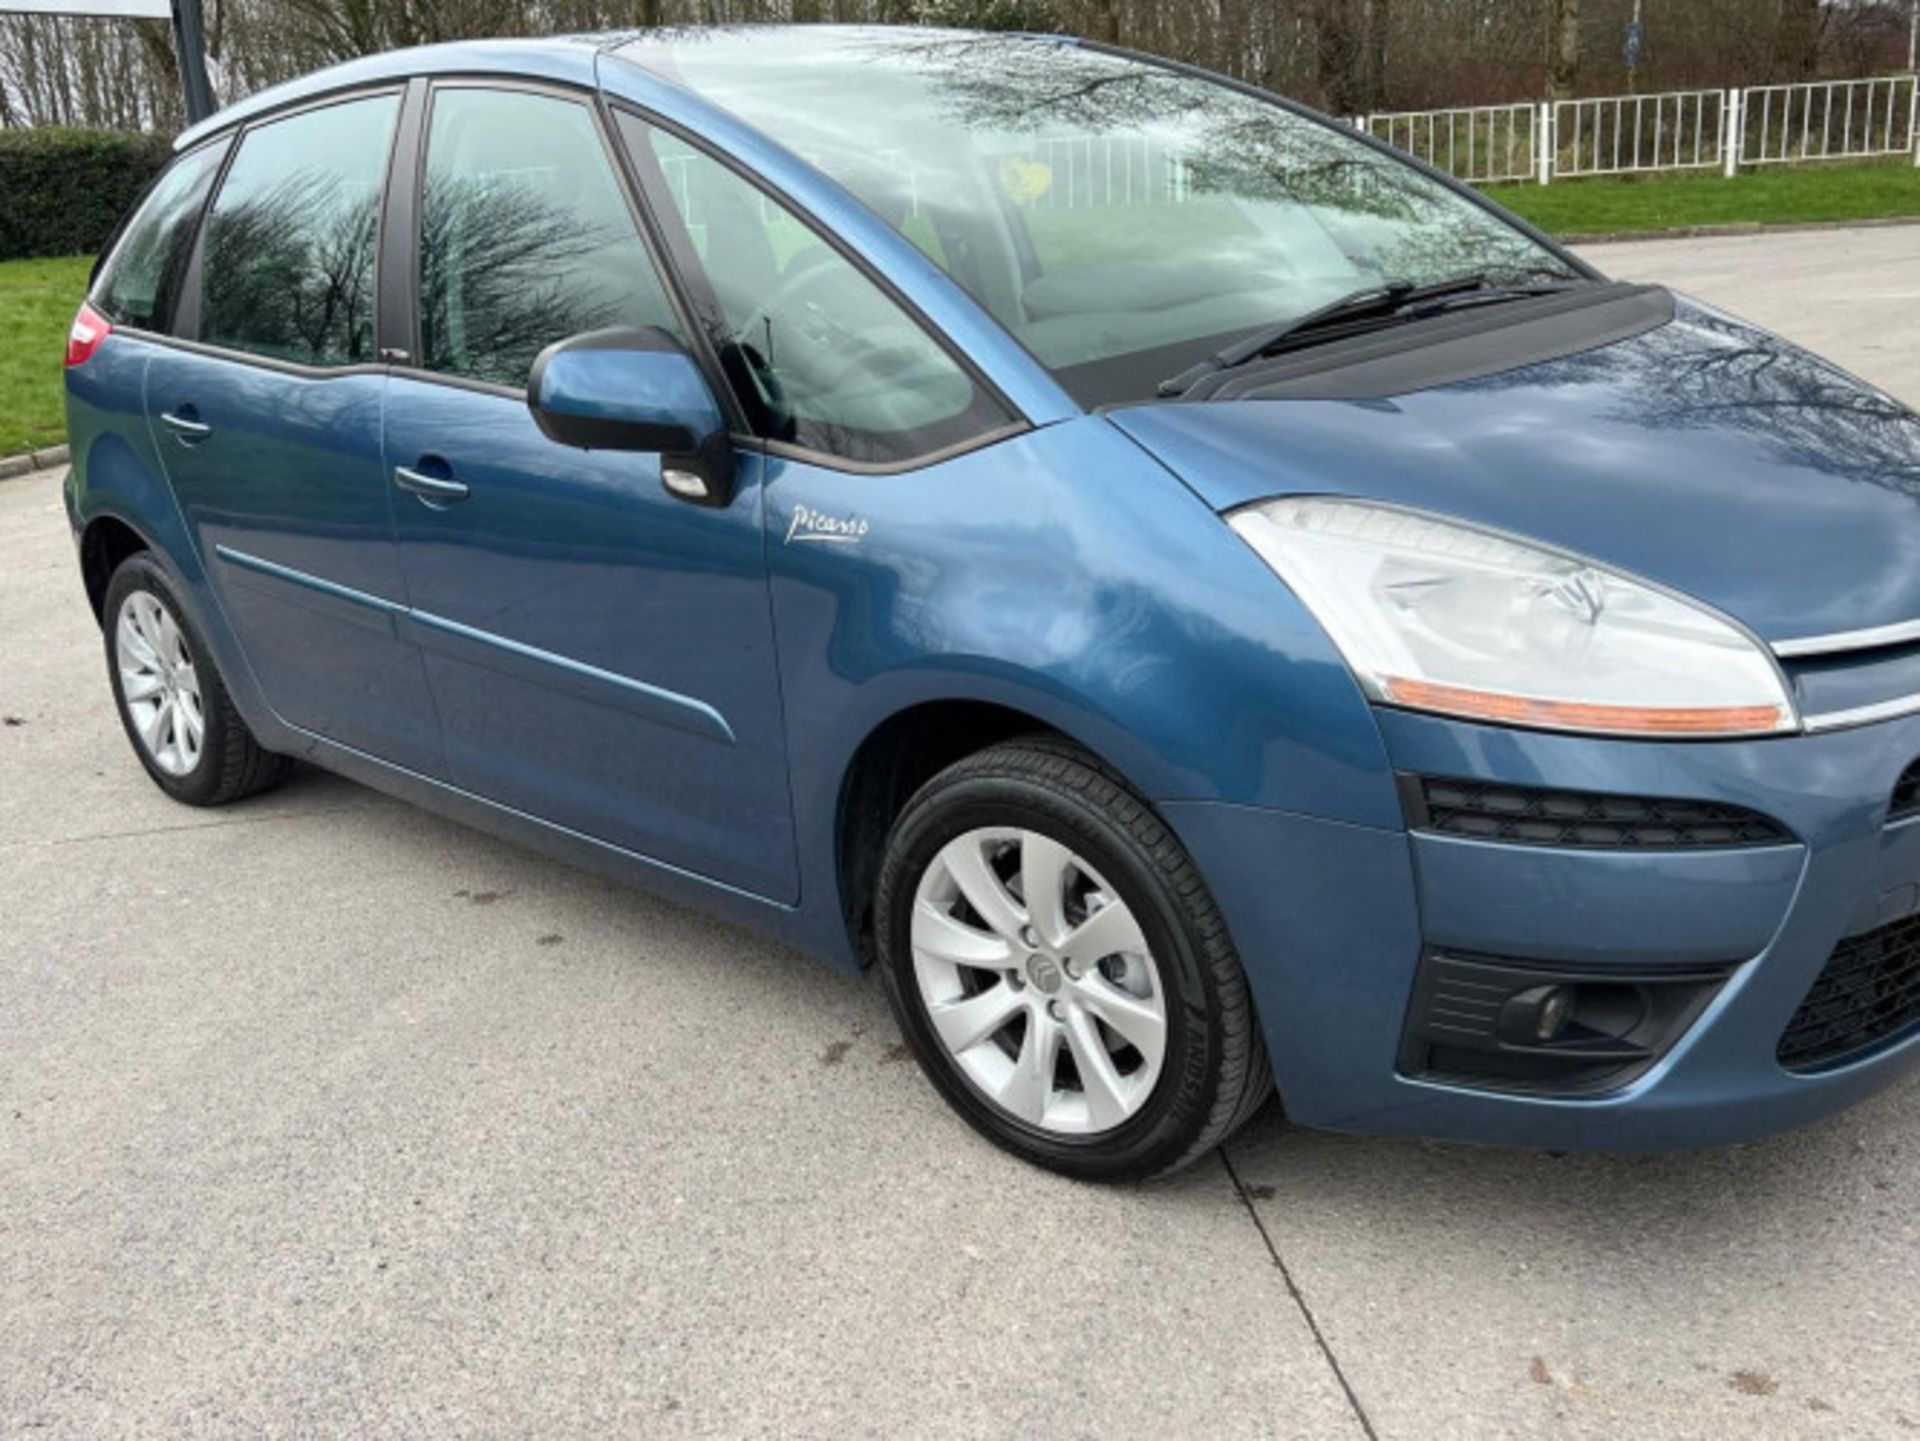 2009 CITROEN C4 PICASSO 1.6 HDI VTR+ EGS6 5DR >>--NO VAT ON HAMMER--<< - Image 104 of 123